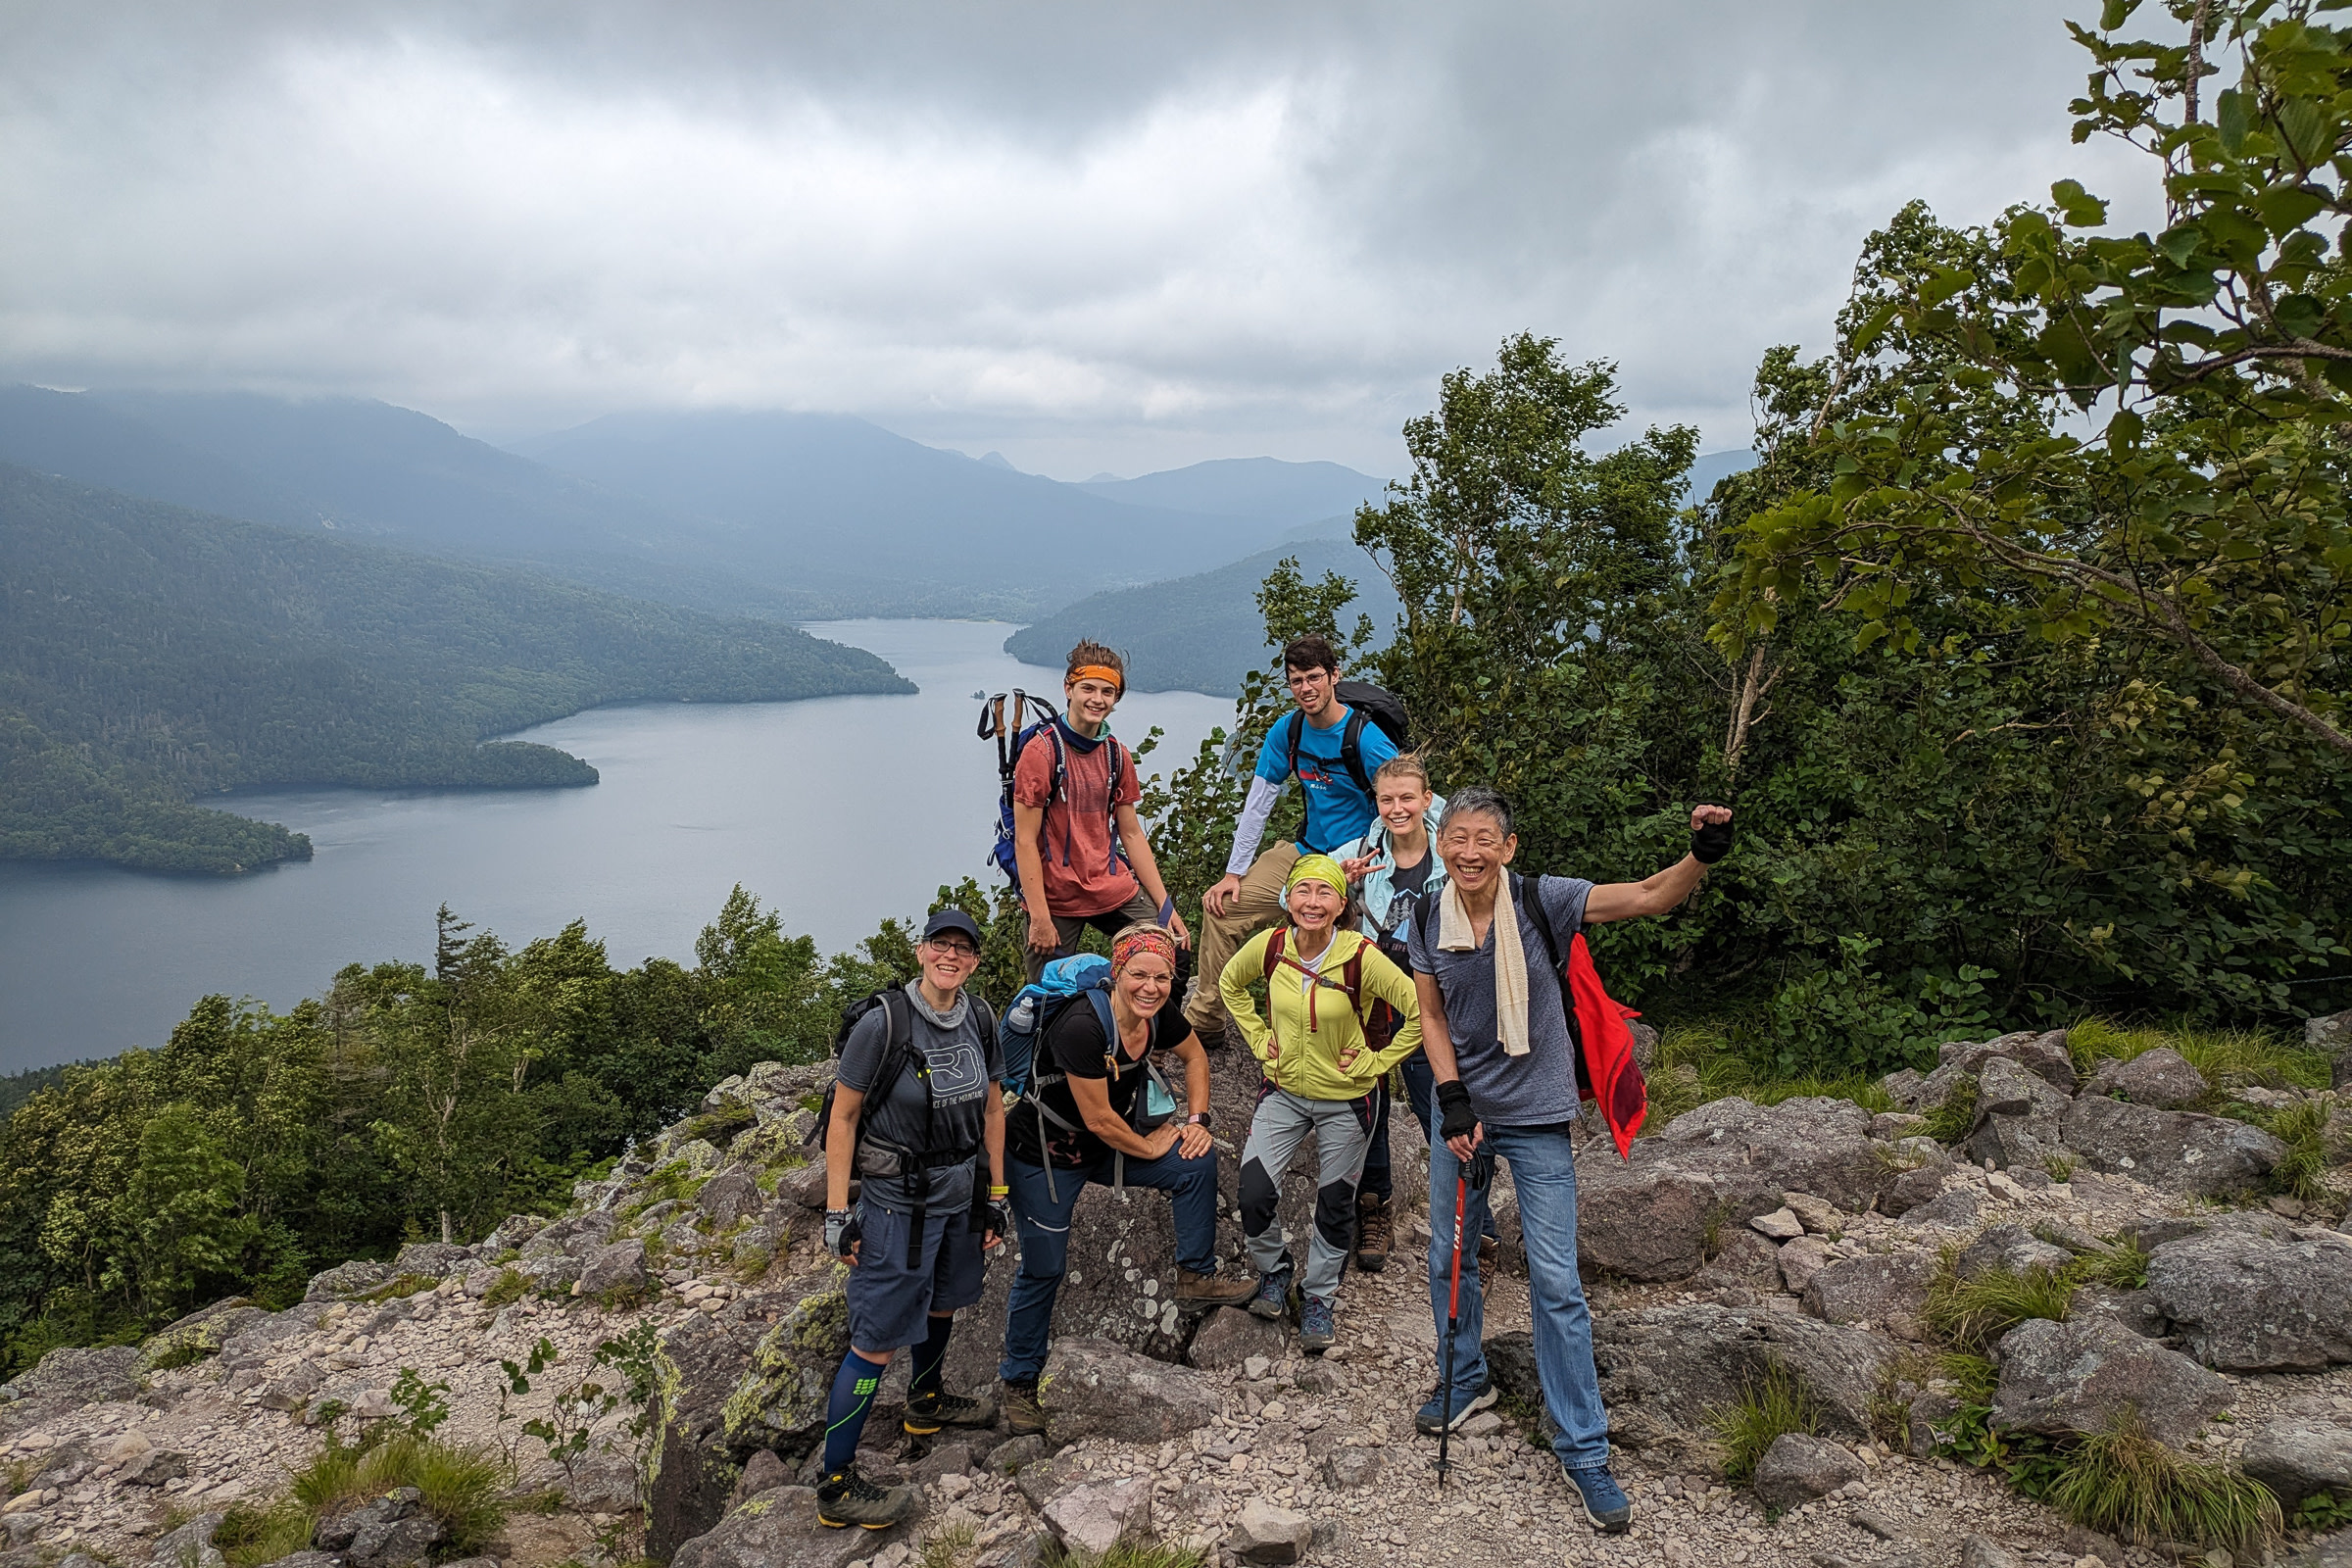 A group of seven hikers beam atop Mt. Hakuunzan, Lake Shikaribetsu in the background. It is a cloudy day.